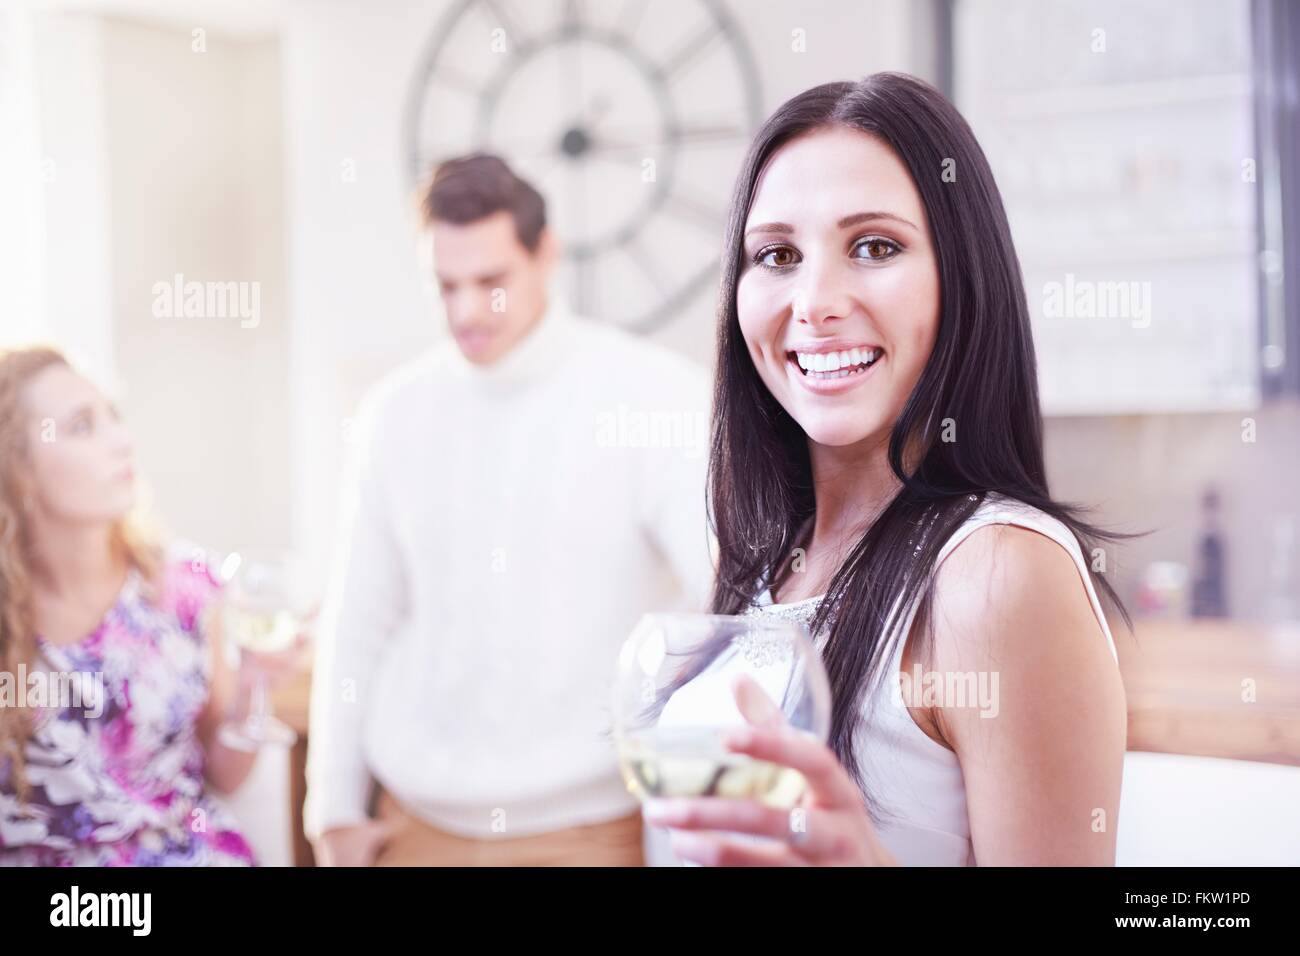 Portrait   young woman drinking wine in kitchen Stock Photo